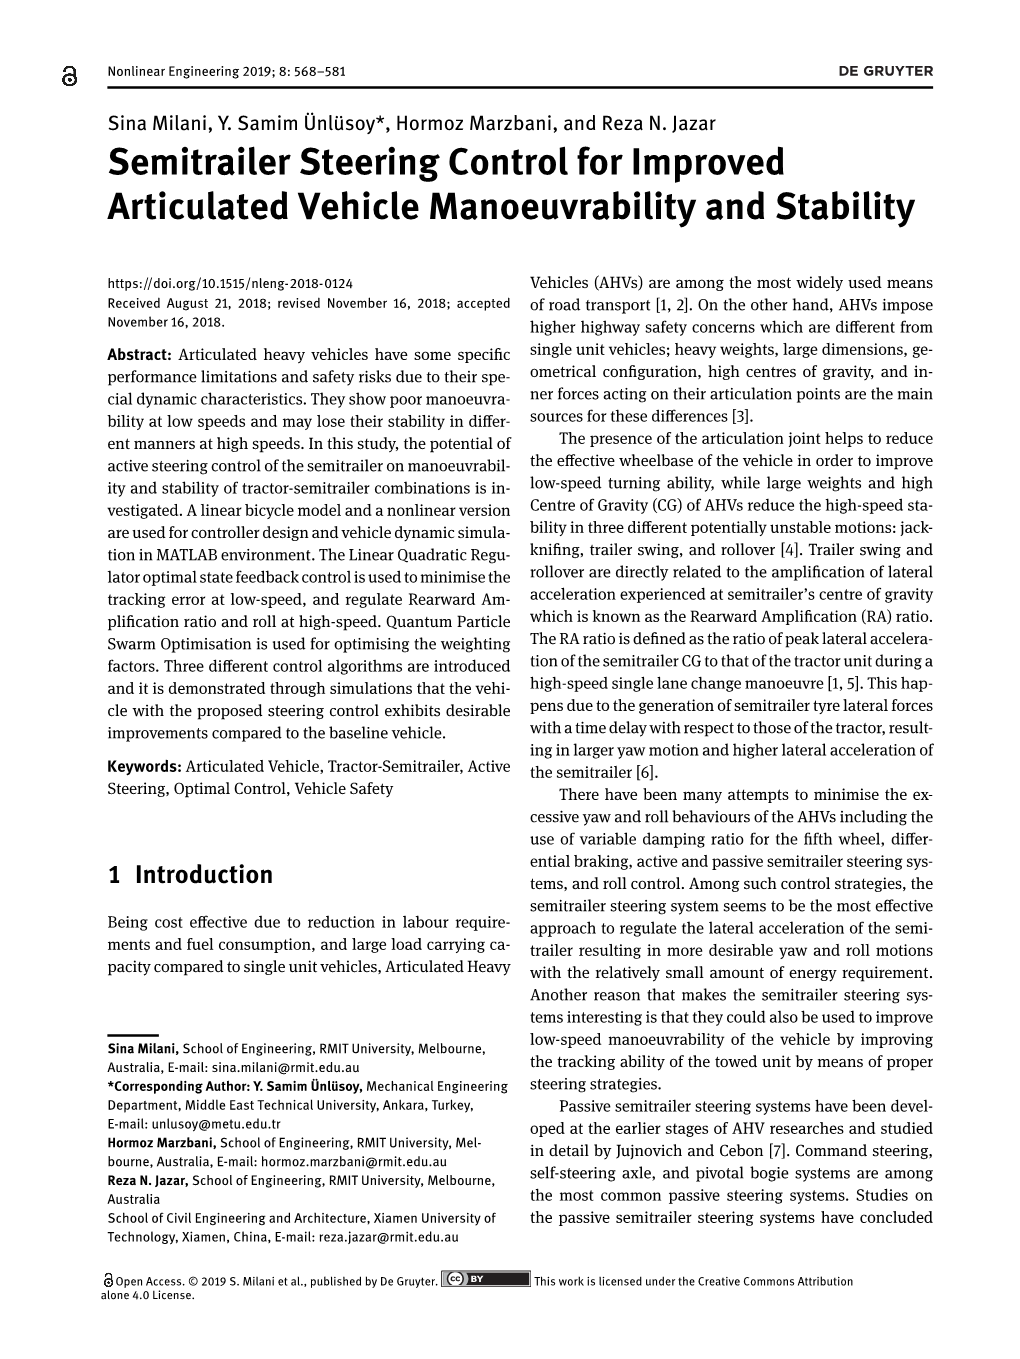 Semitrailer Steering Control for Improved Articulated Vehicle Manoeuvrability and Stability